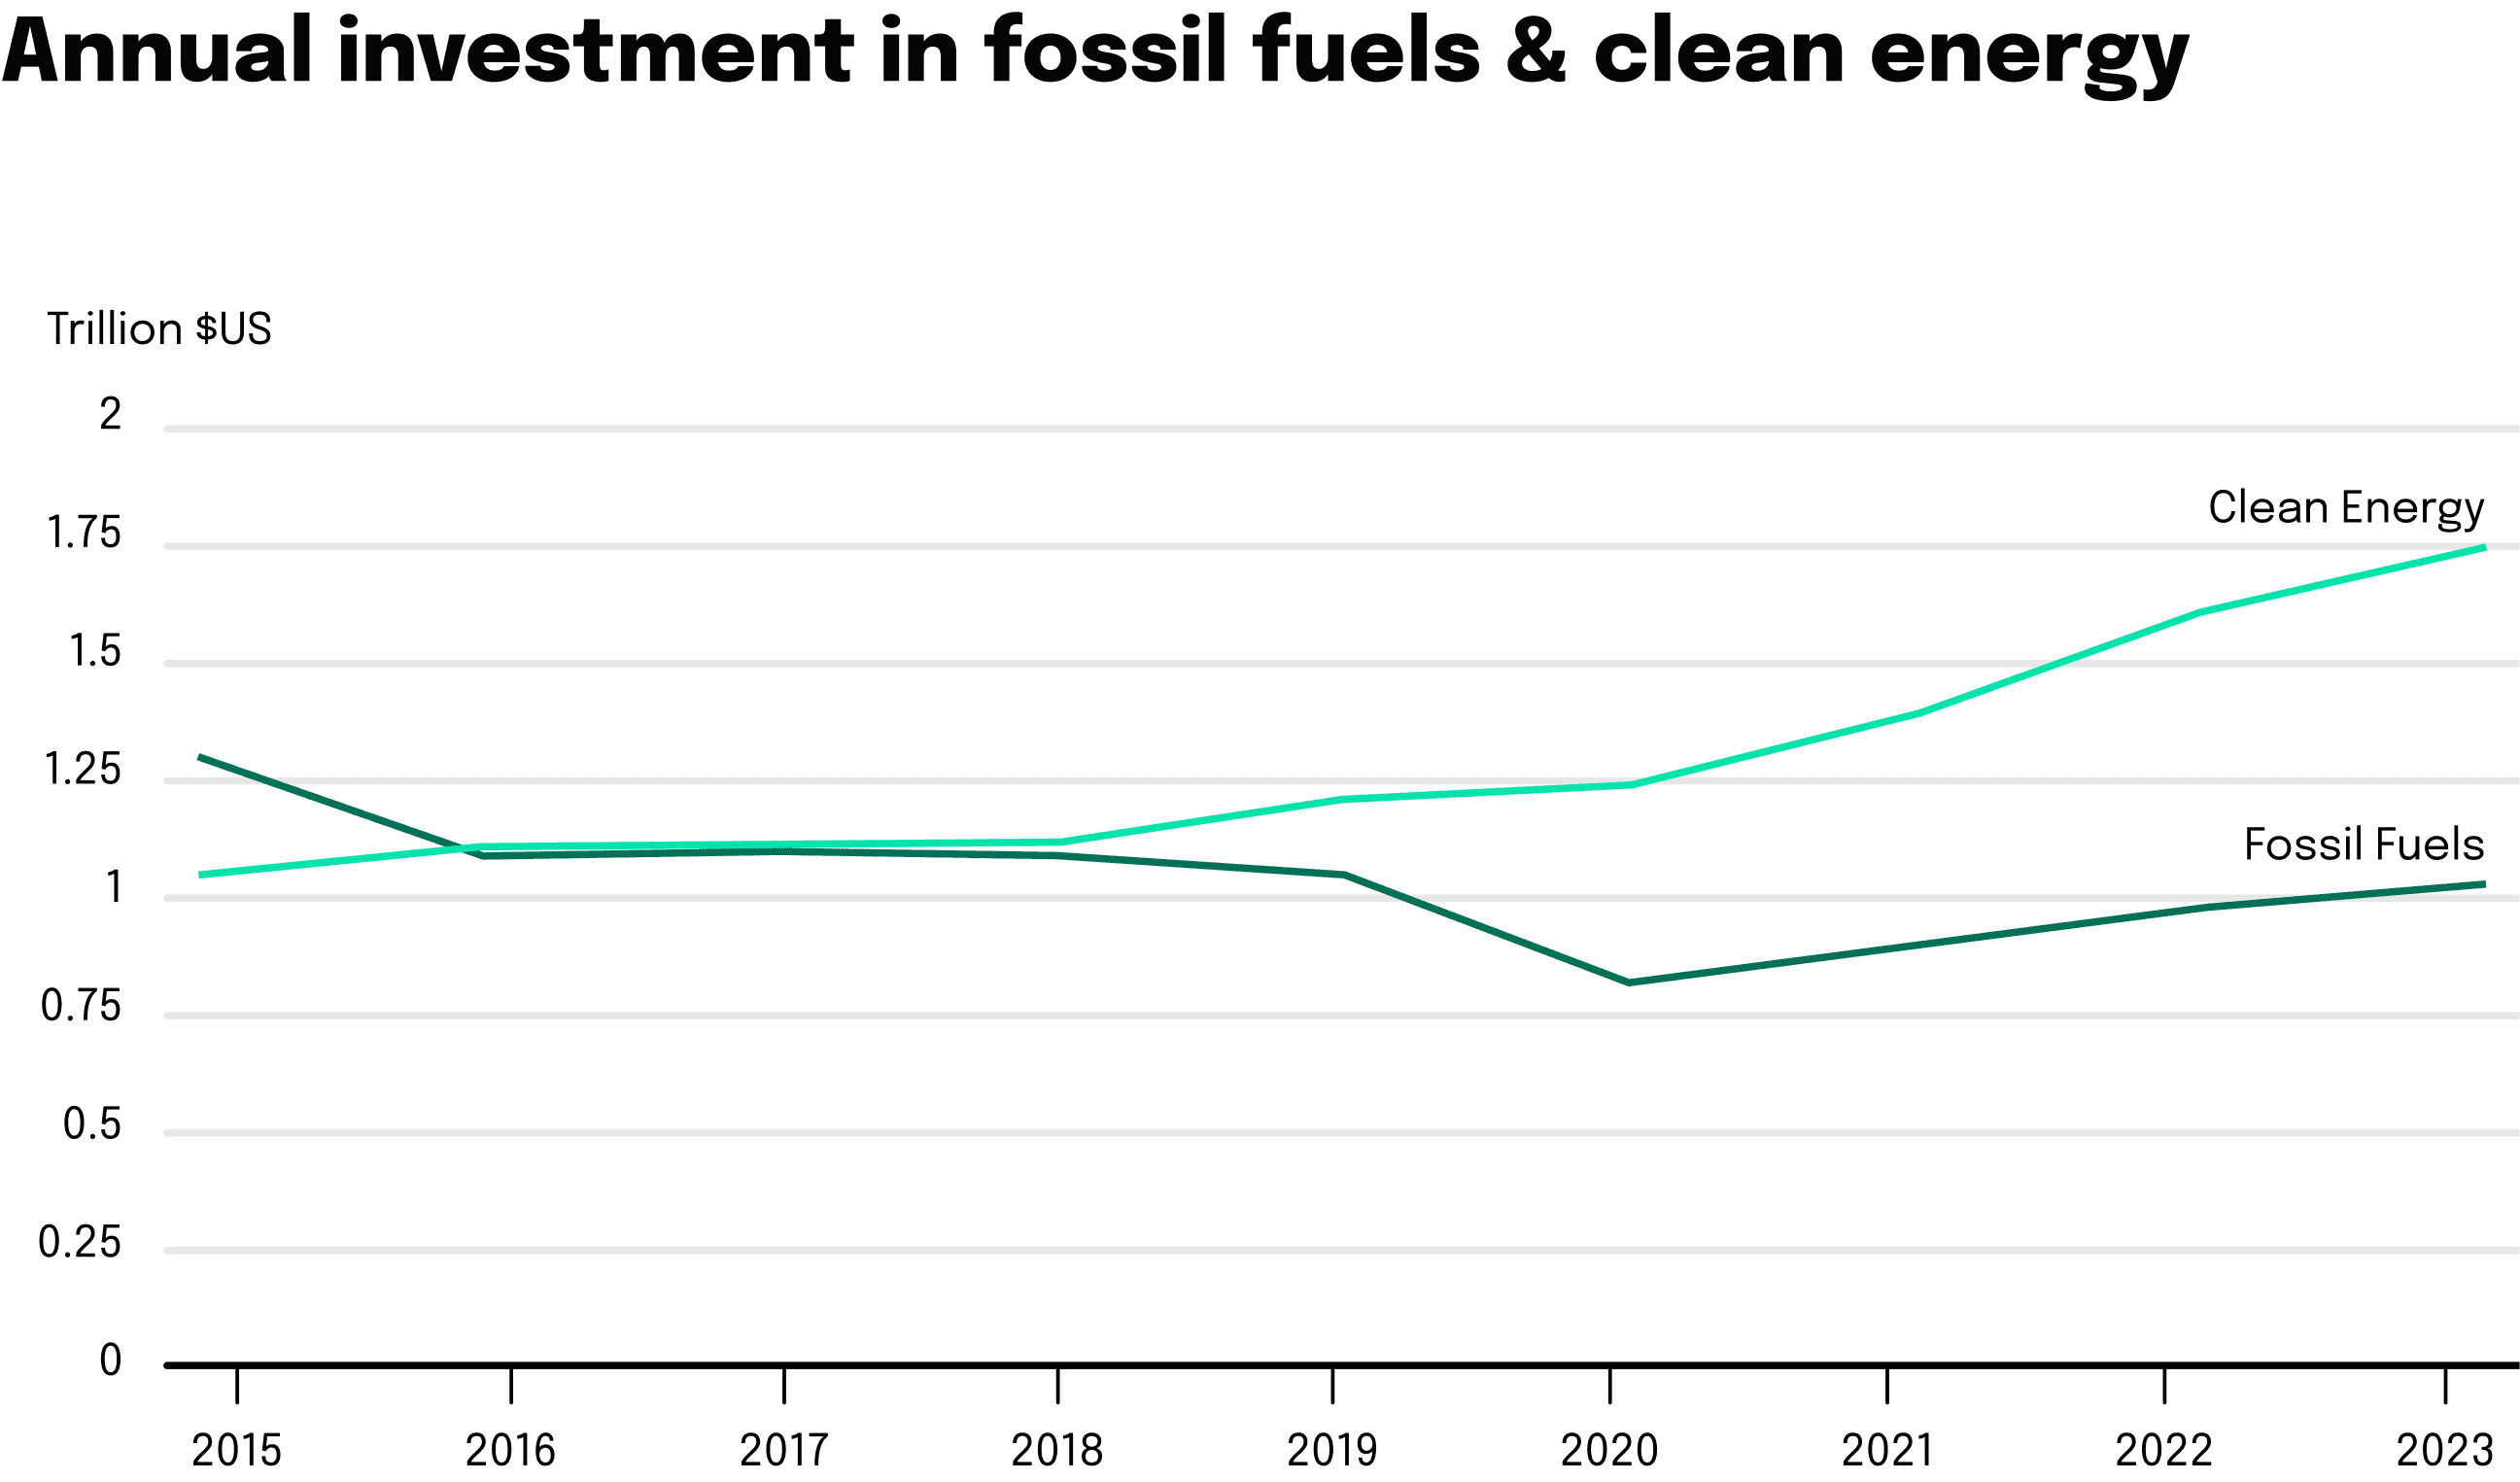 This line graph titled "Annual investment in fossil fuels & clean energy" contrasts the investment trends in fossil fuels against clean energy over an unspecified time period. Two lines are plotted on the graph, with the top line showing a consistent upward trajectory representing increasing investments in clean energy. In contrast, the bottom line, representing fossil fuel investments, starts level with clean energy investments, dips slightly below, and then runs parallel at a lower level, indicating a relative decrease in investments compared to clean energy. The graph illustrates a clear trend of growing investment in clean energy, while fossil fuel investments remain flat or decrease slightly, signifying a shift in focus towards more sustainable energy sources.